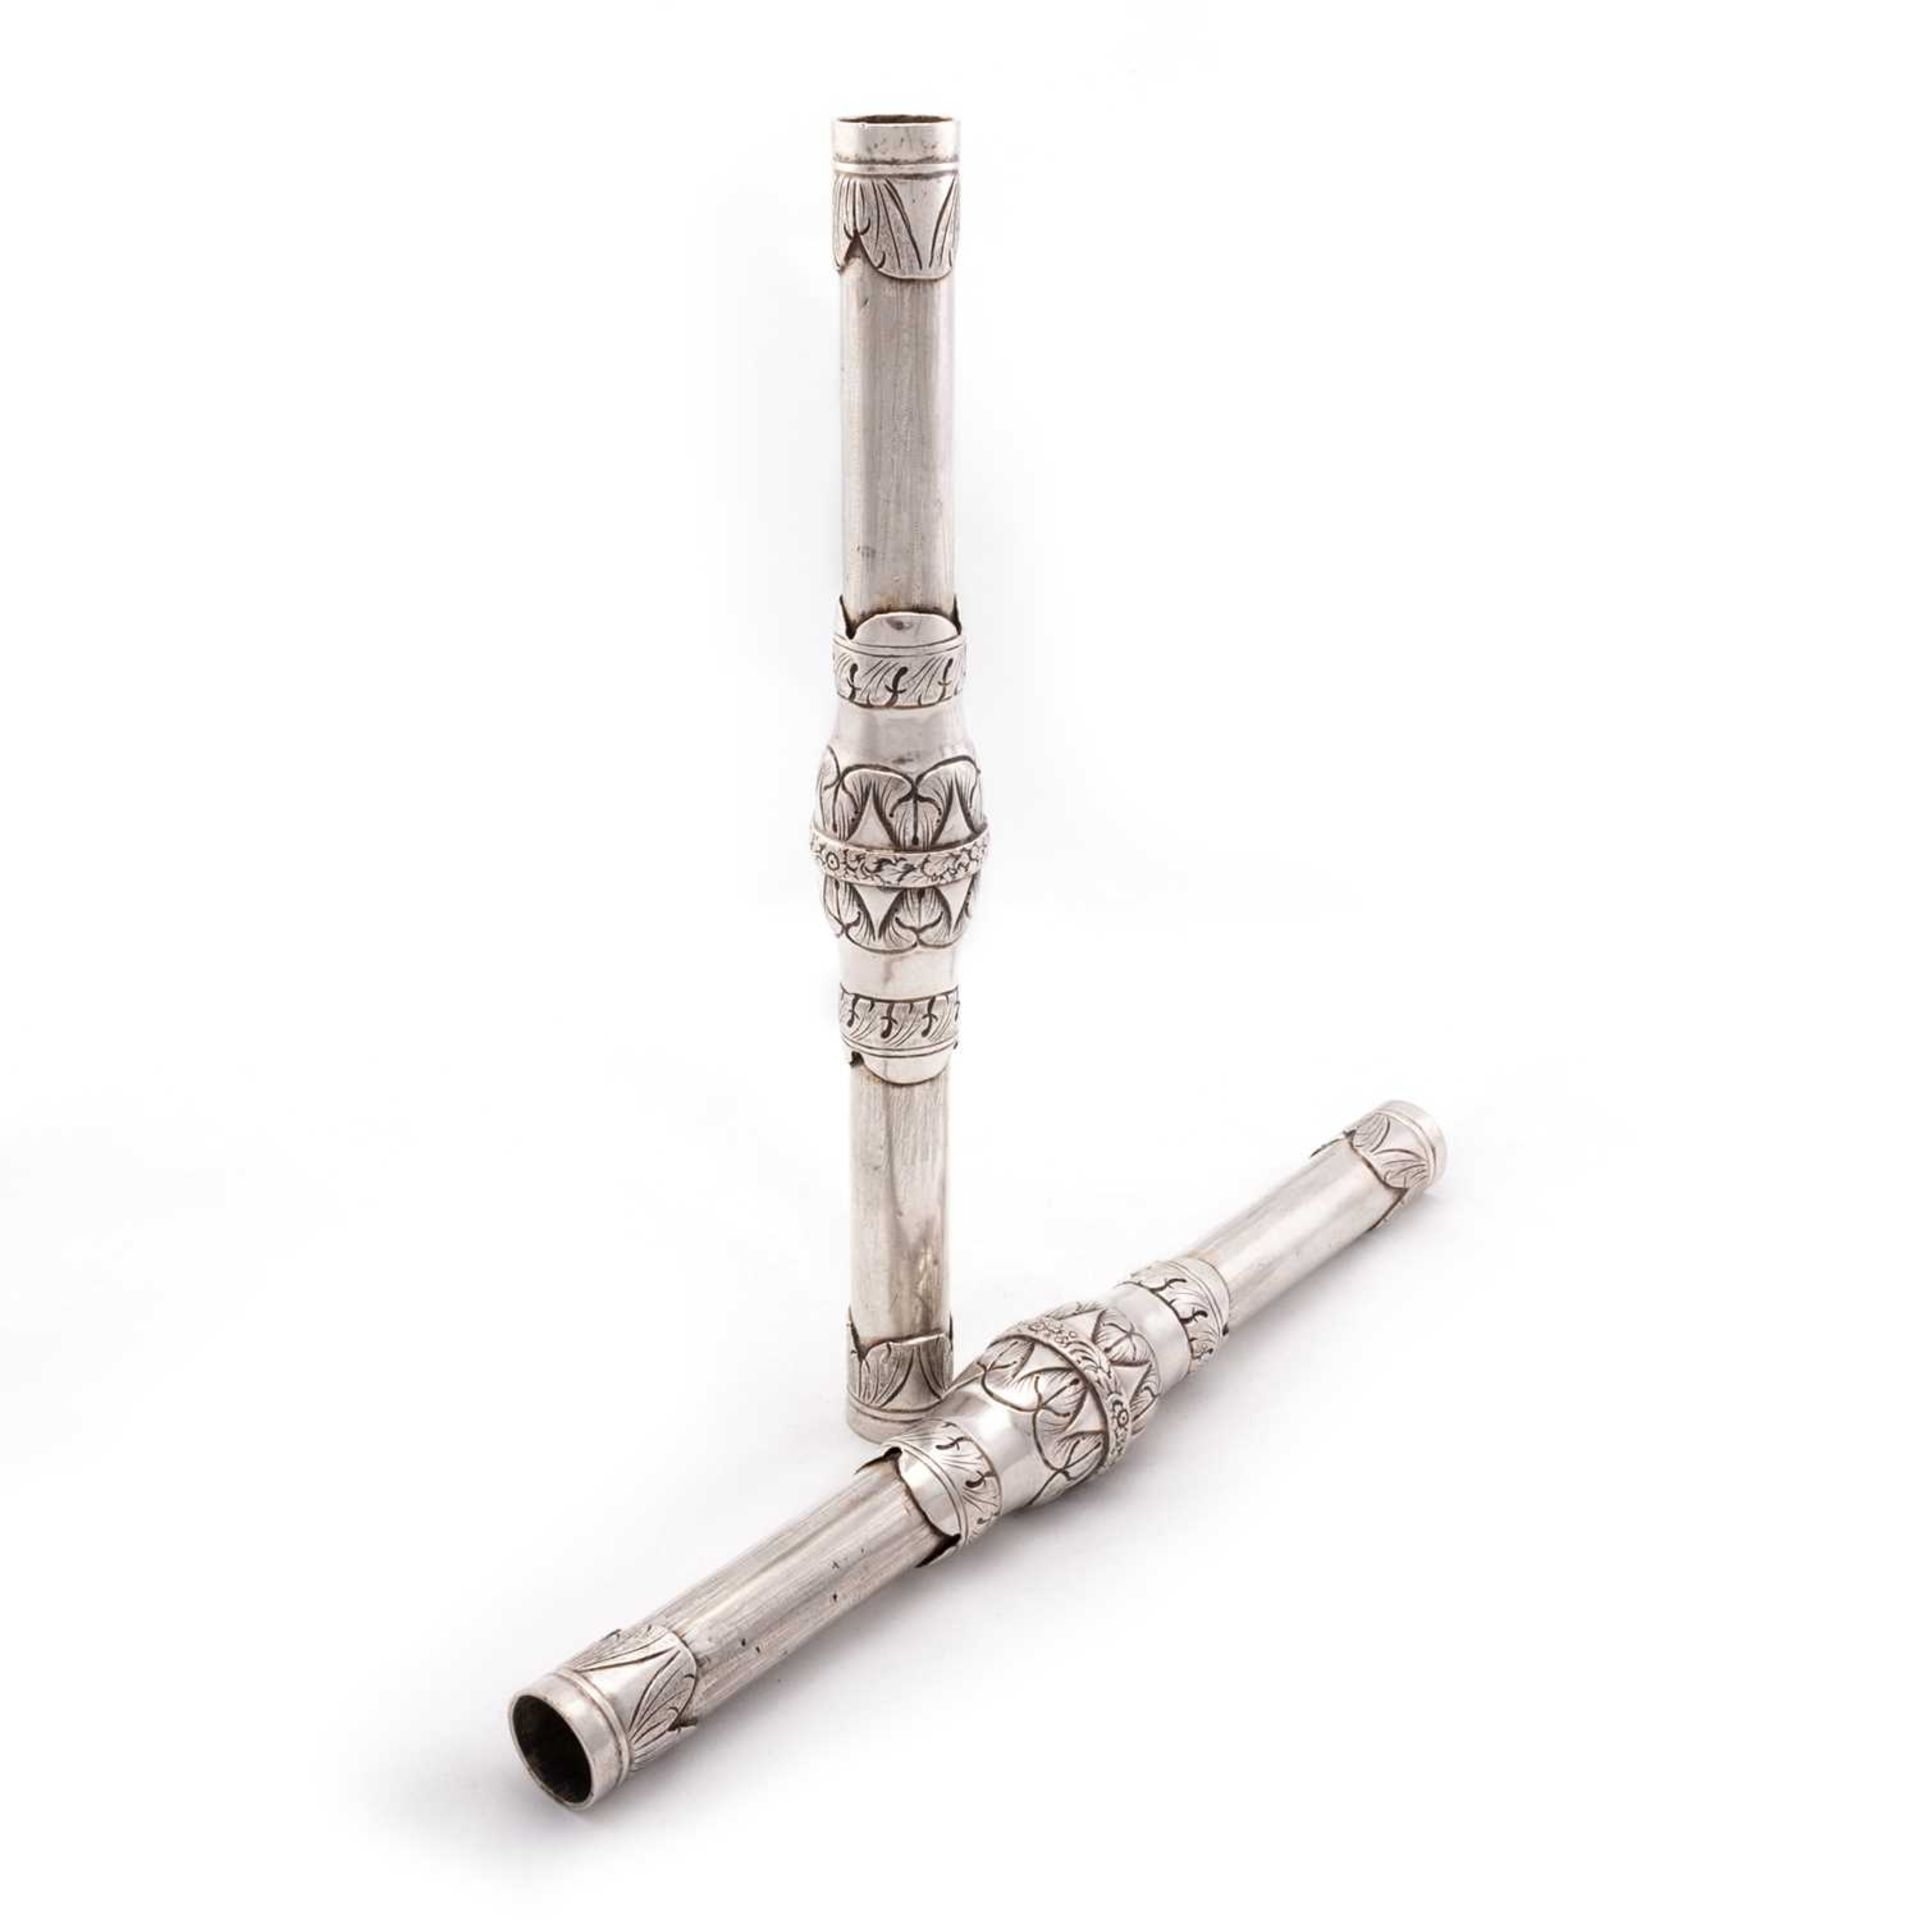 A PAIR OF SPANISH COLONIAL SILVER SCROLL HOLDERS OR CEREMONIAL BATONS